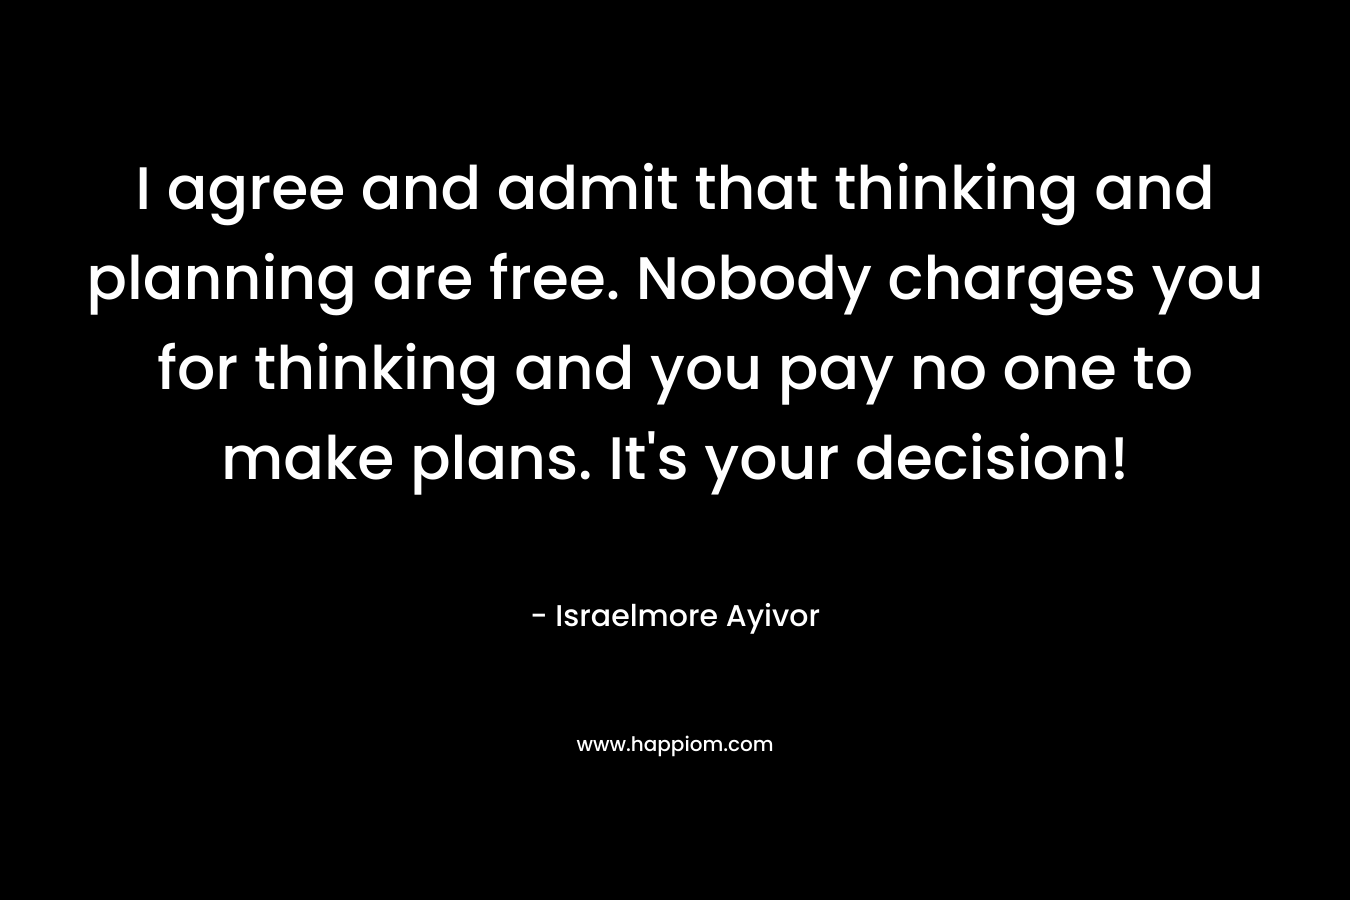 I agree and admit that thinking and planning are free. Nobody charges you for thinking and you pay no one to make plans. It’s your decision! – Israelmore Ayivor